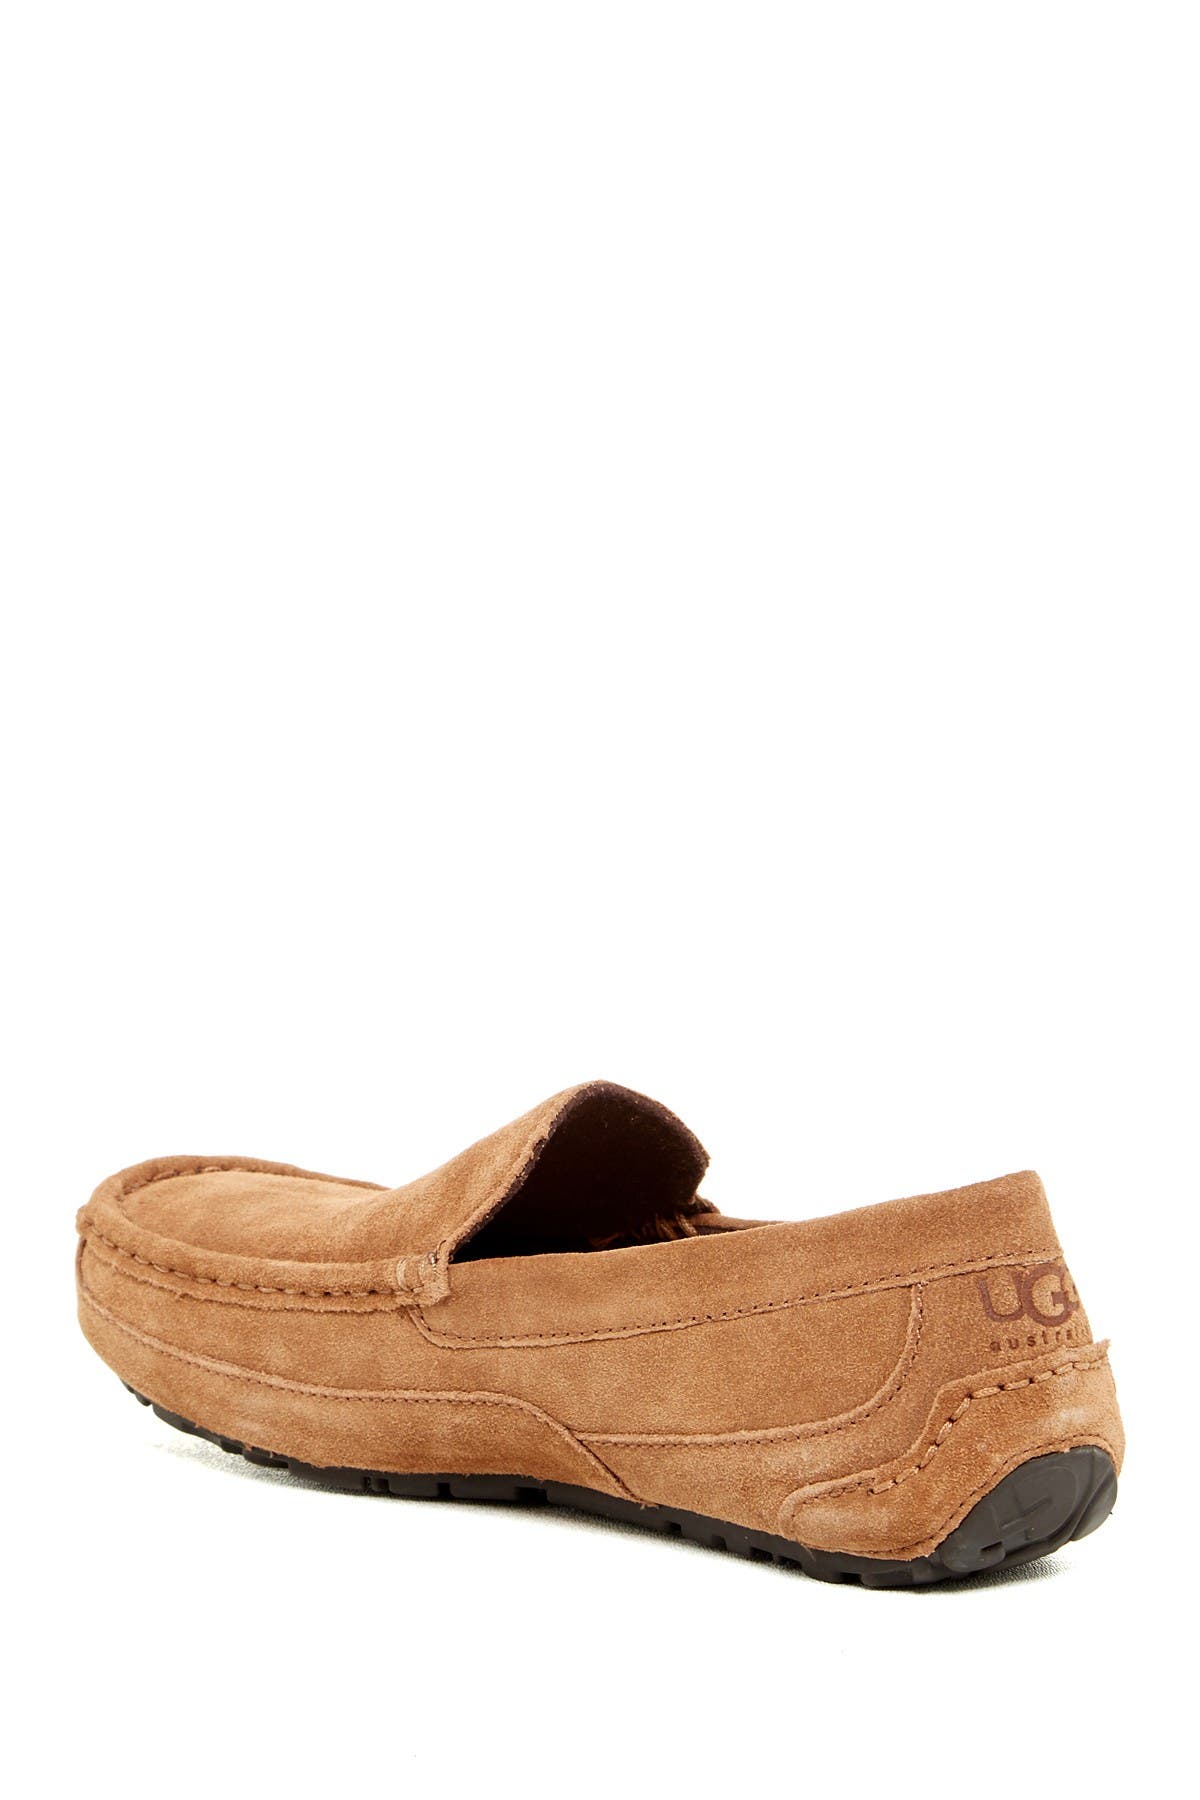 ugg pure slippers